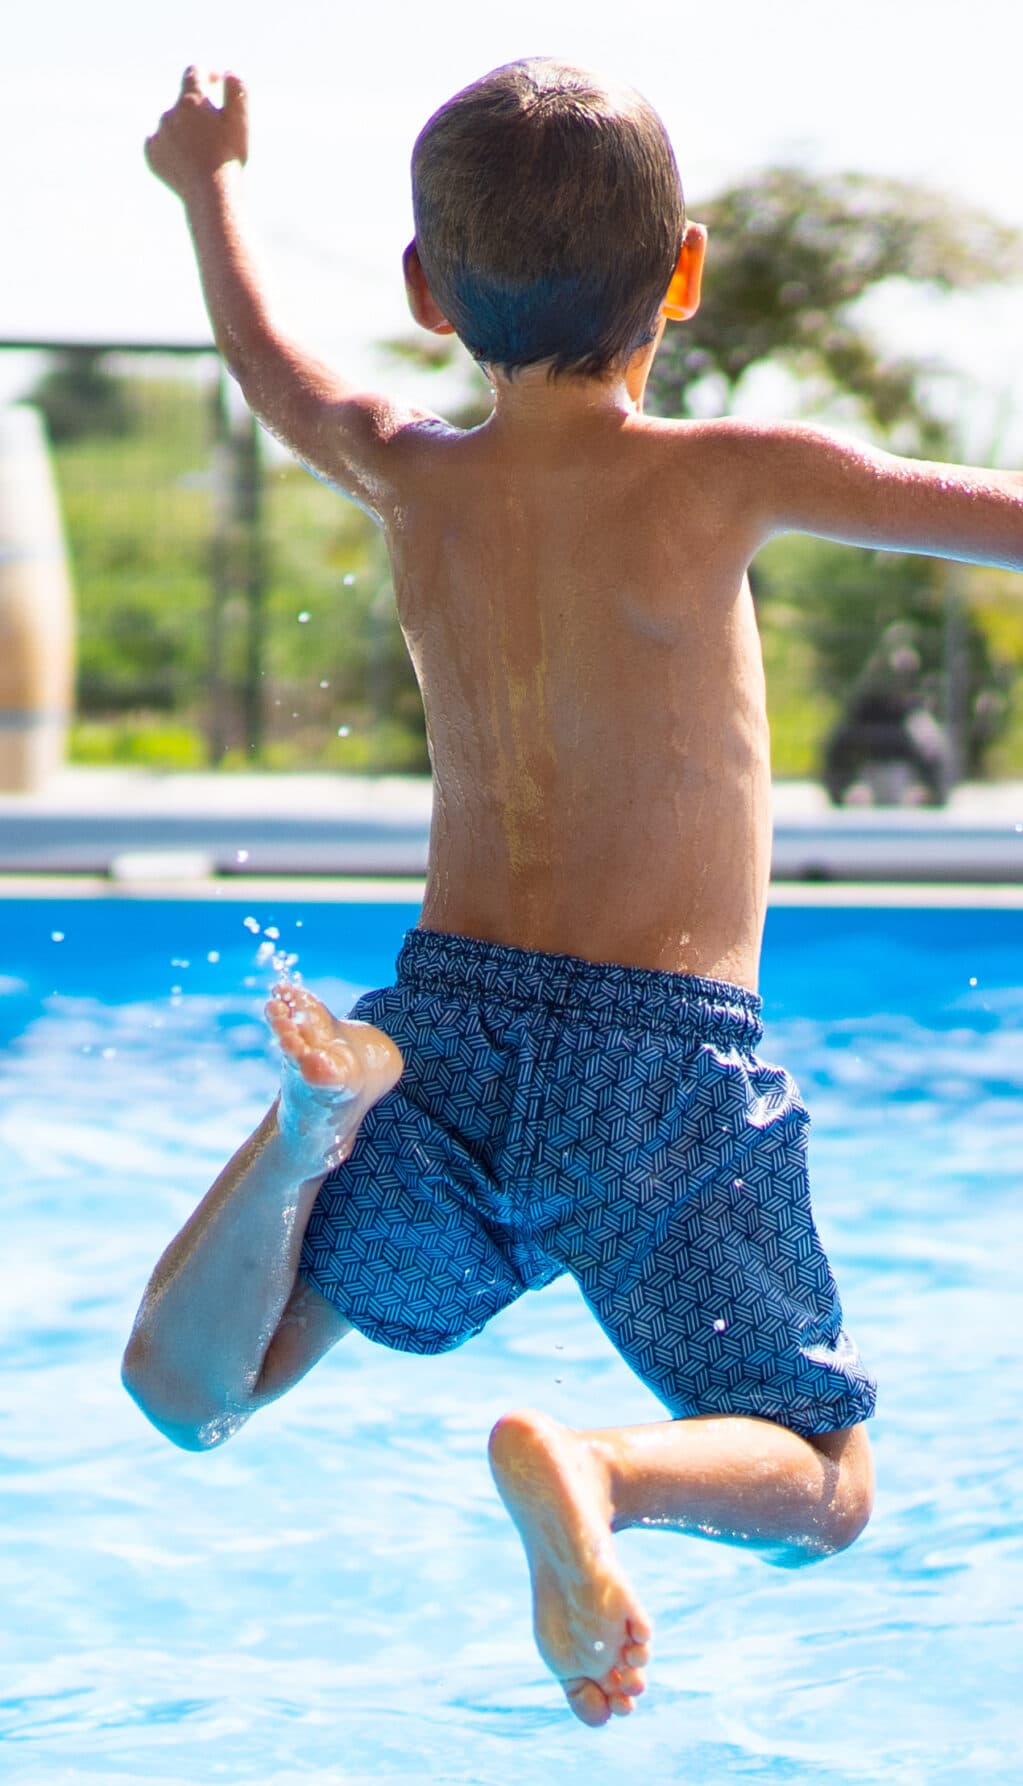 hello summer holidays – boy jumping in swimming pool